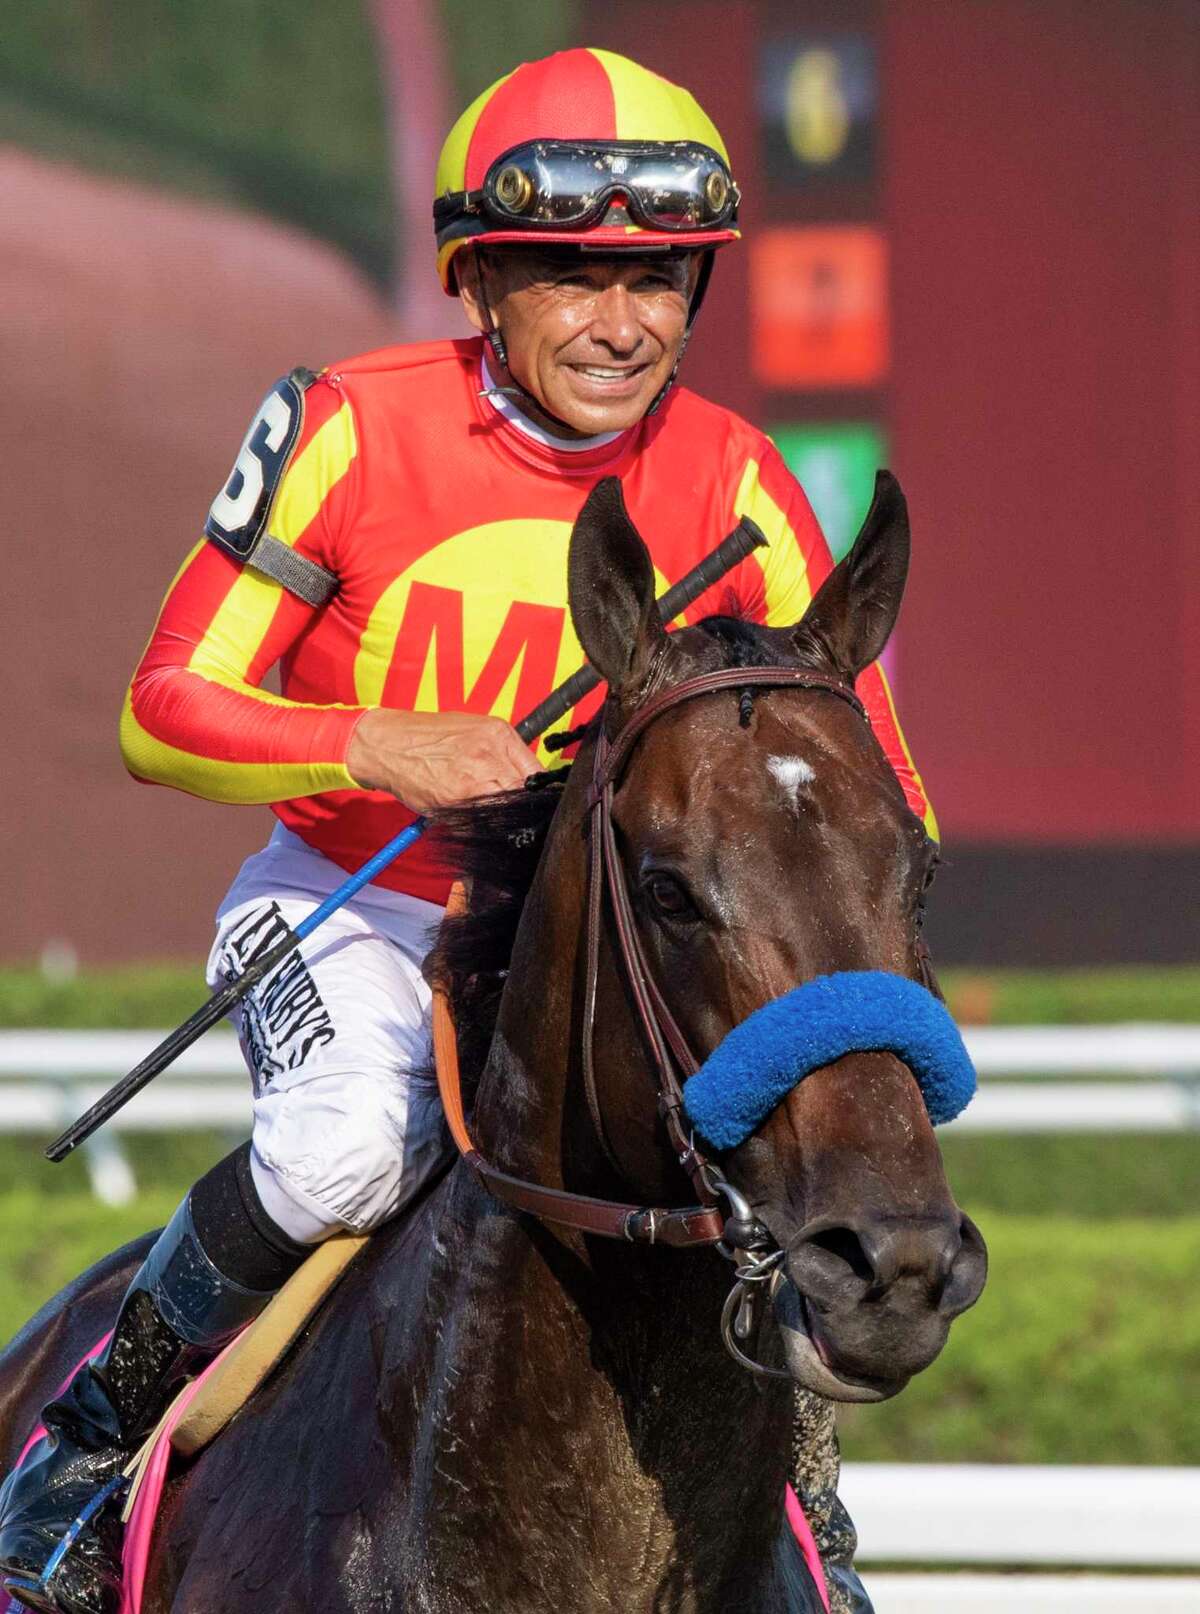 Jockey Mike Smith is all smiles in jubilation after winning the 92nd running of The Whitney on McKinzie at the Saratoga Race Course Saturday, Aug. 3, 2019 in Saratoga Springs, N.Y. Photo Special to the Times Union by Skip Dickstein